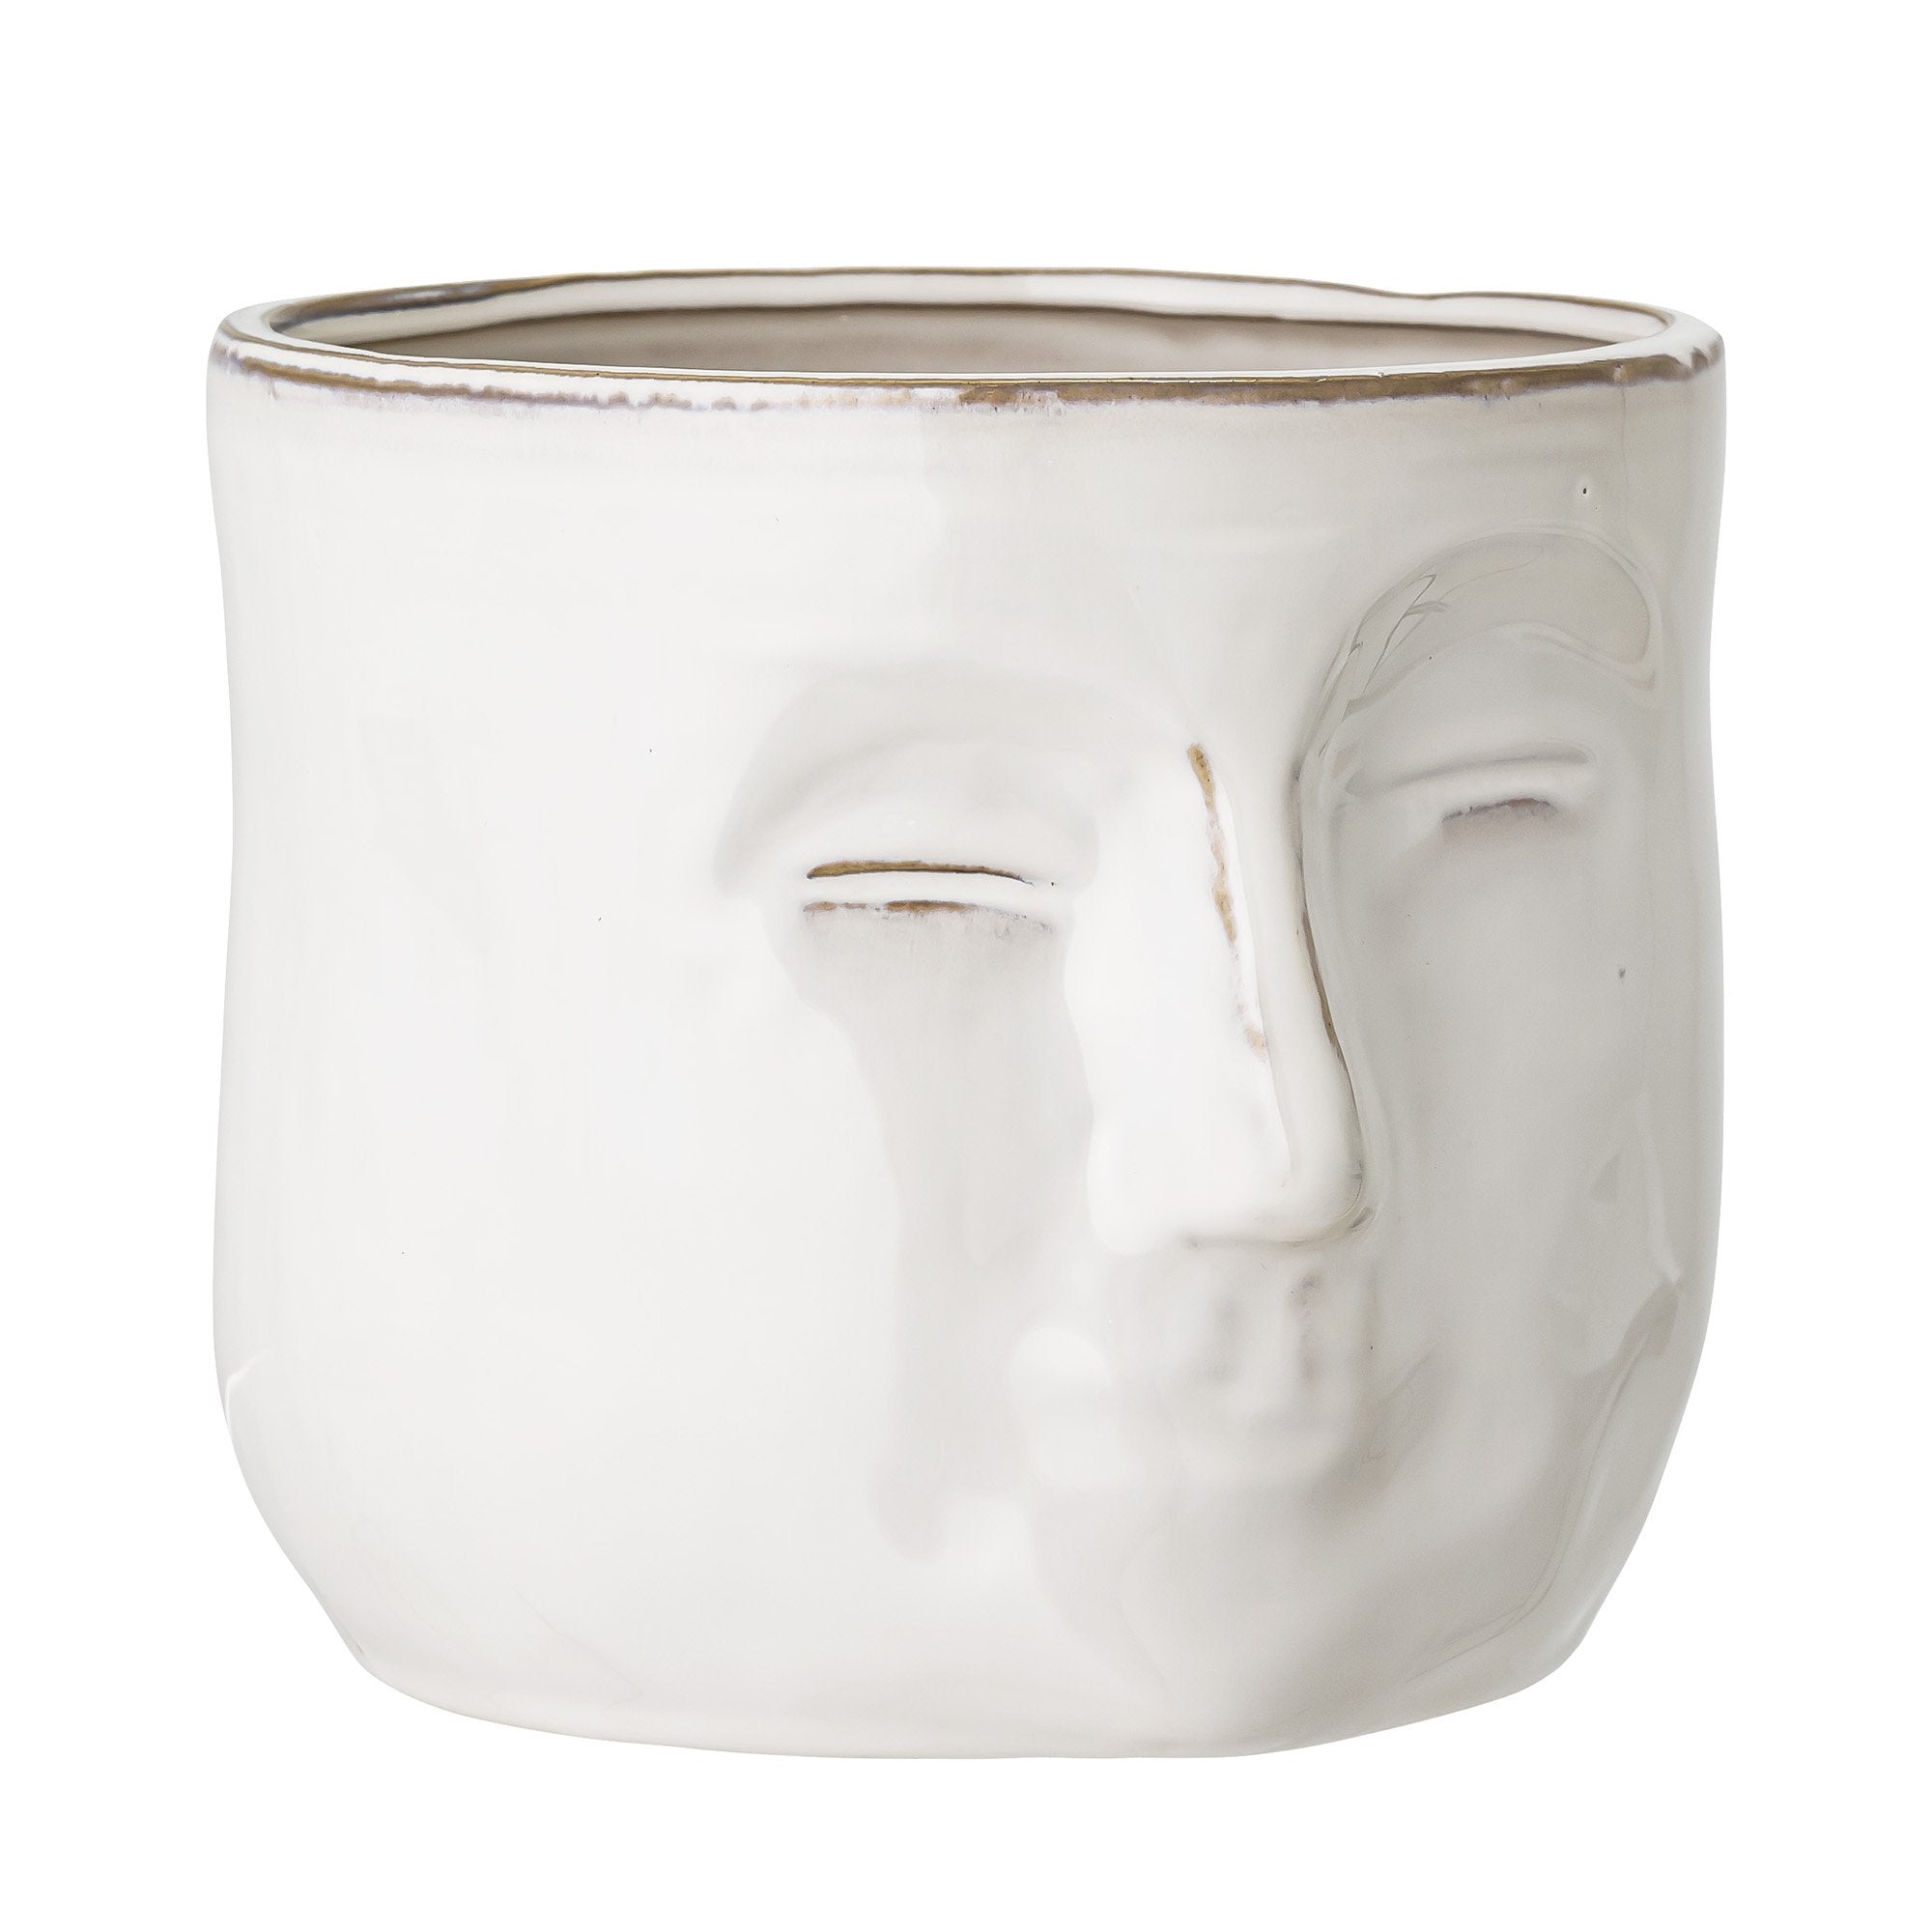 Ignacius is a hand -made stoneware, a spectacular pot. A delicate face emerges from a non -uniform structure, which will be an original decoration. Fit in the latest trends, it will find in many interiors, especially in the Scandinavian, boho, rustic or minimalist style.